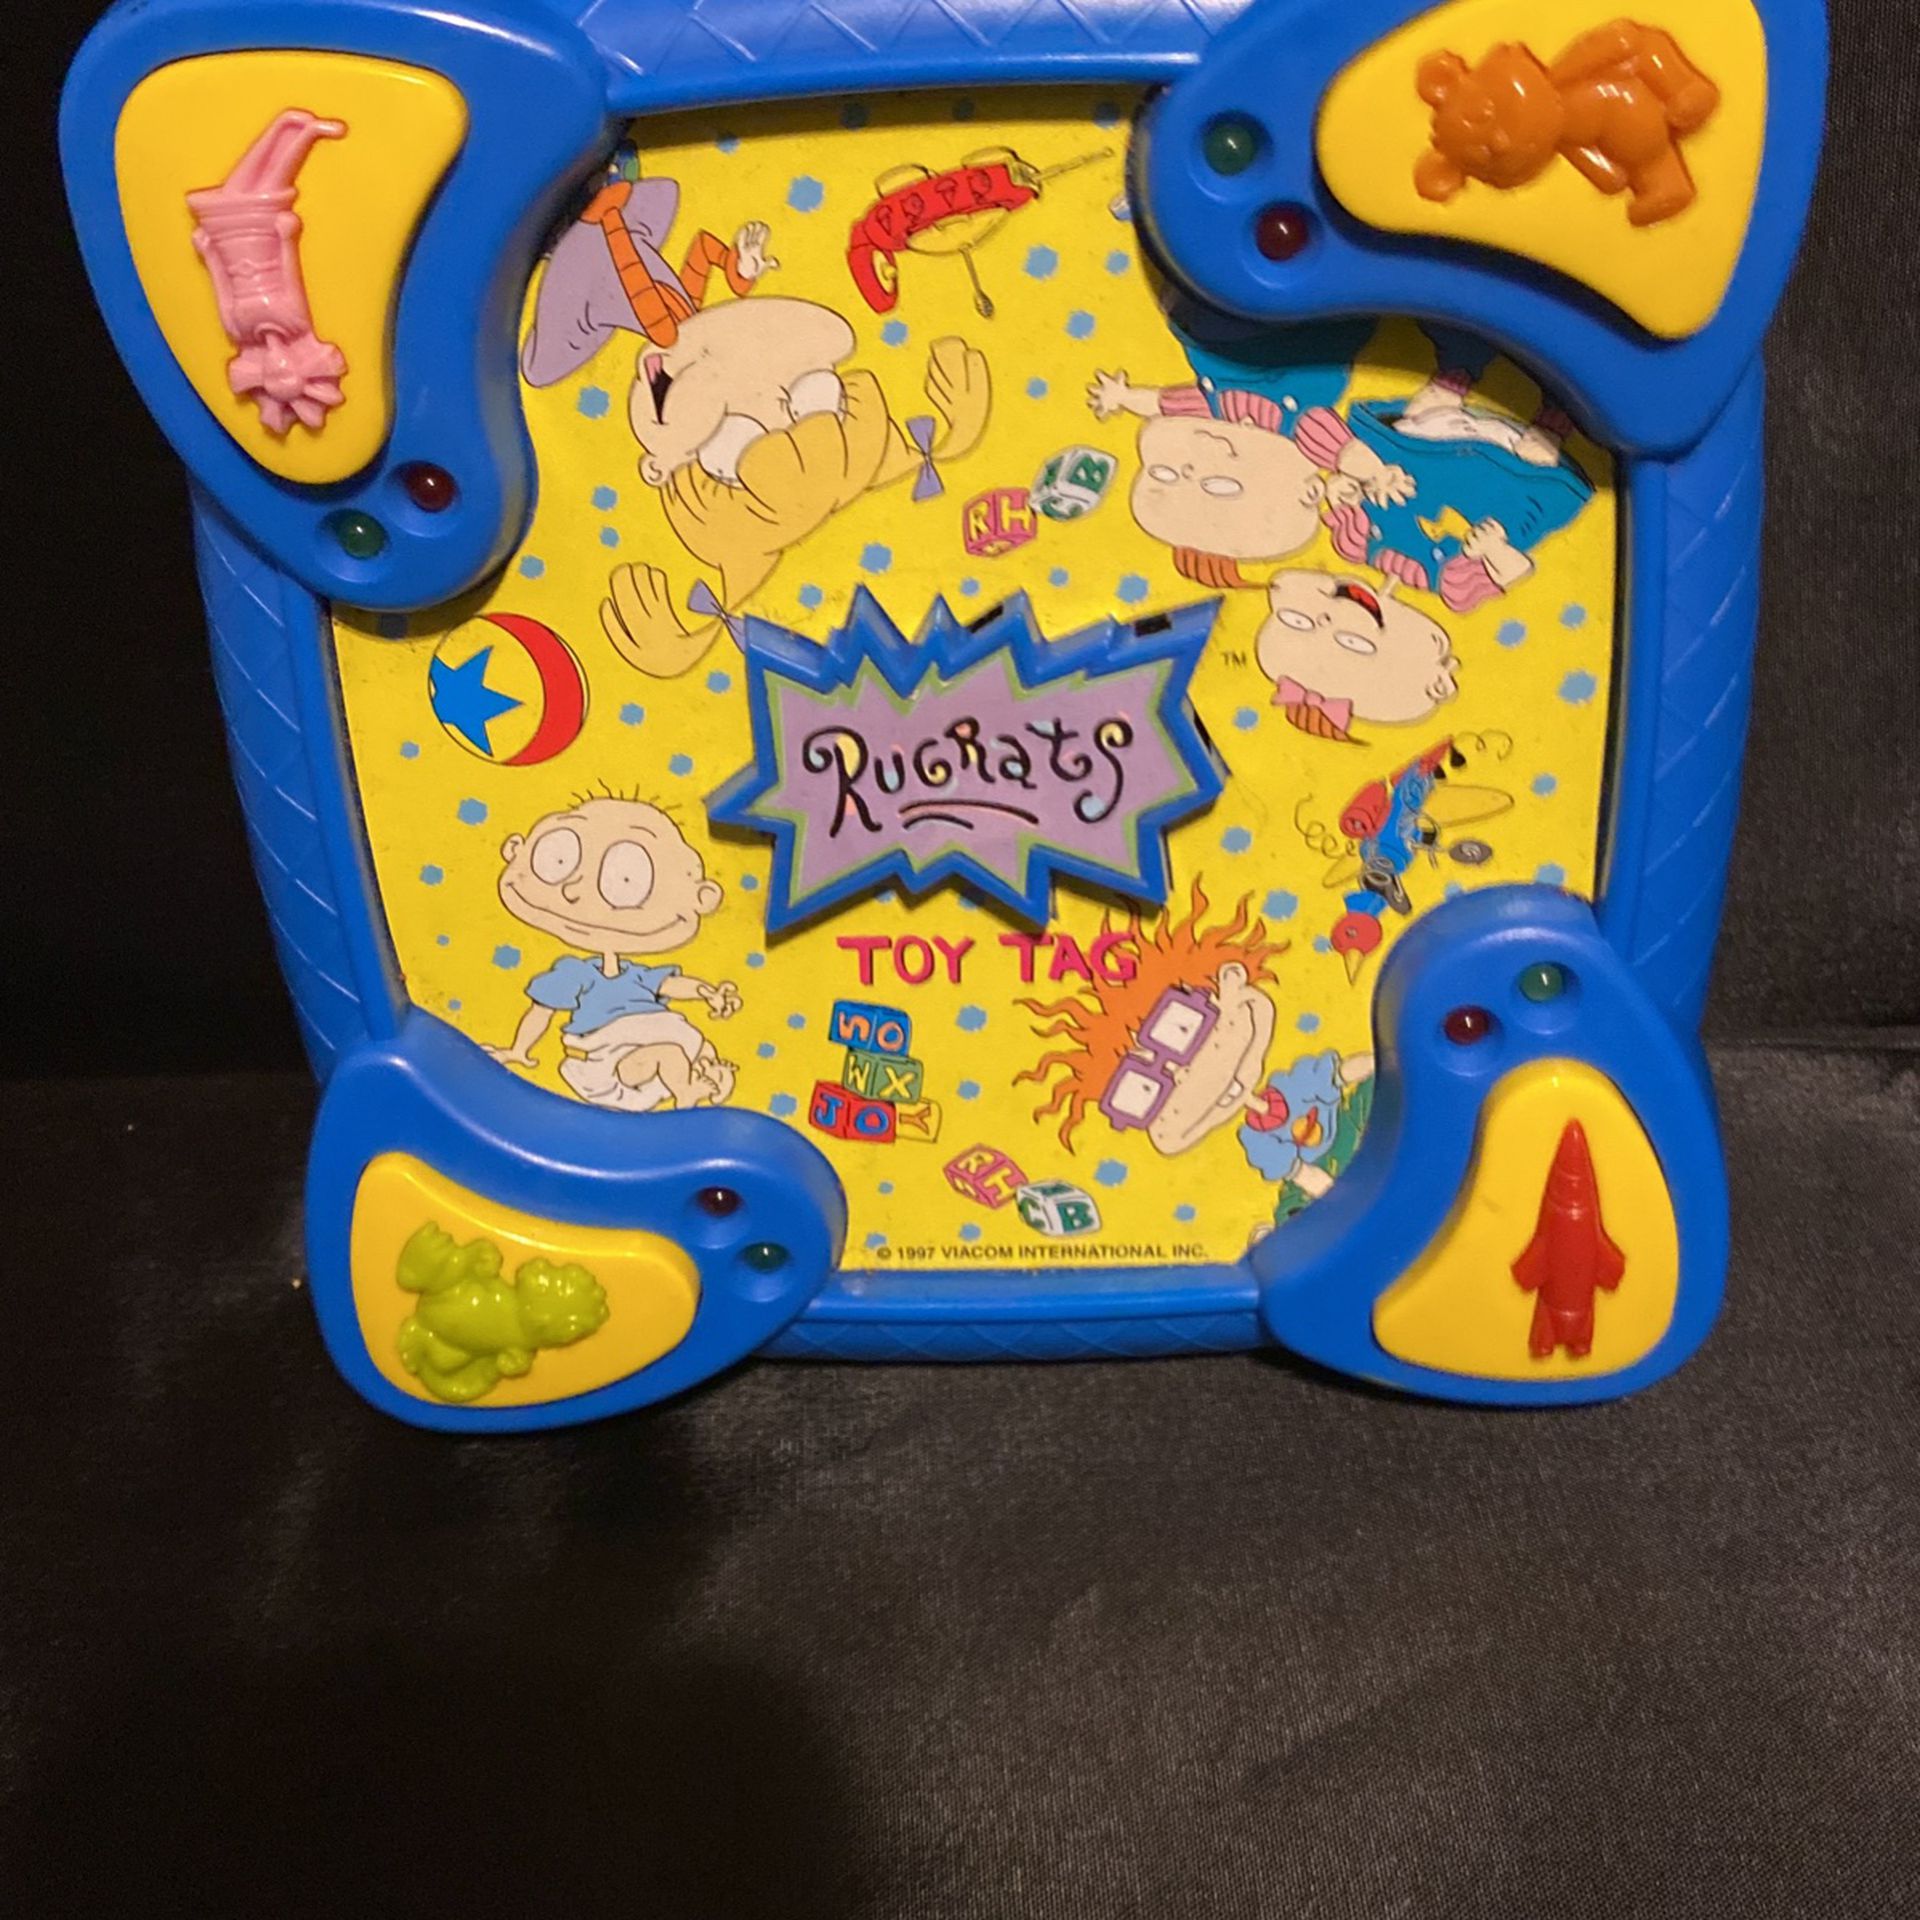 Rugrats Toy Tags